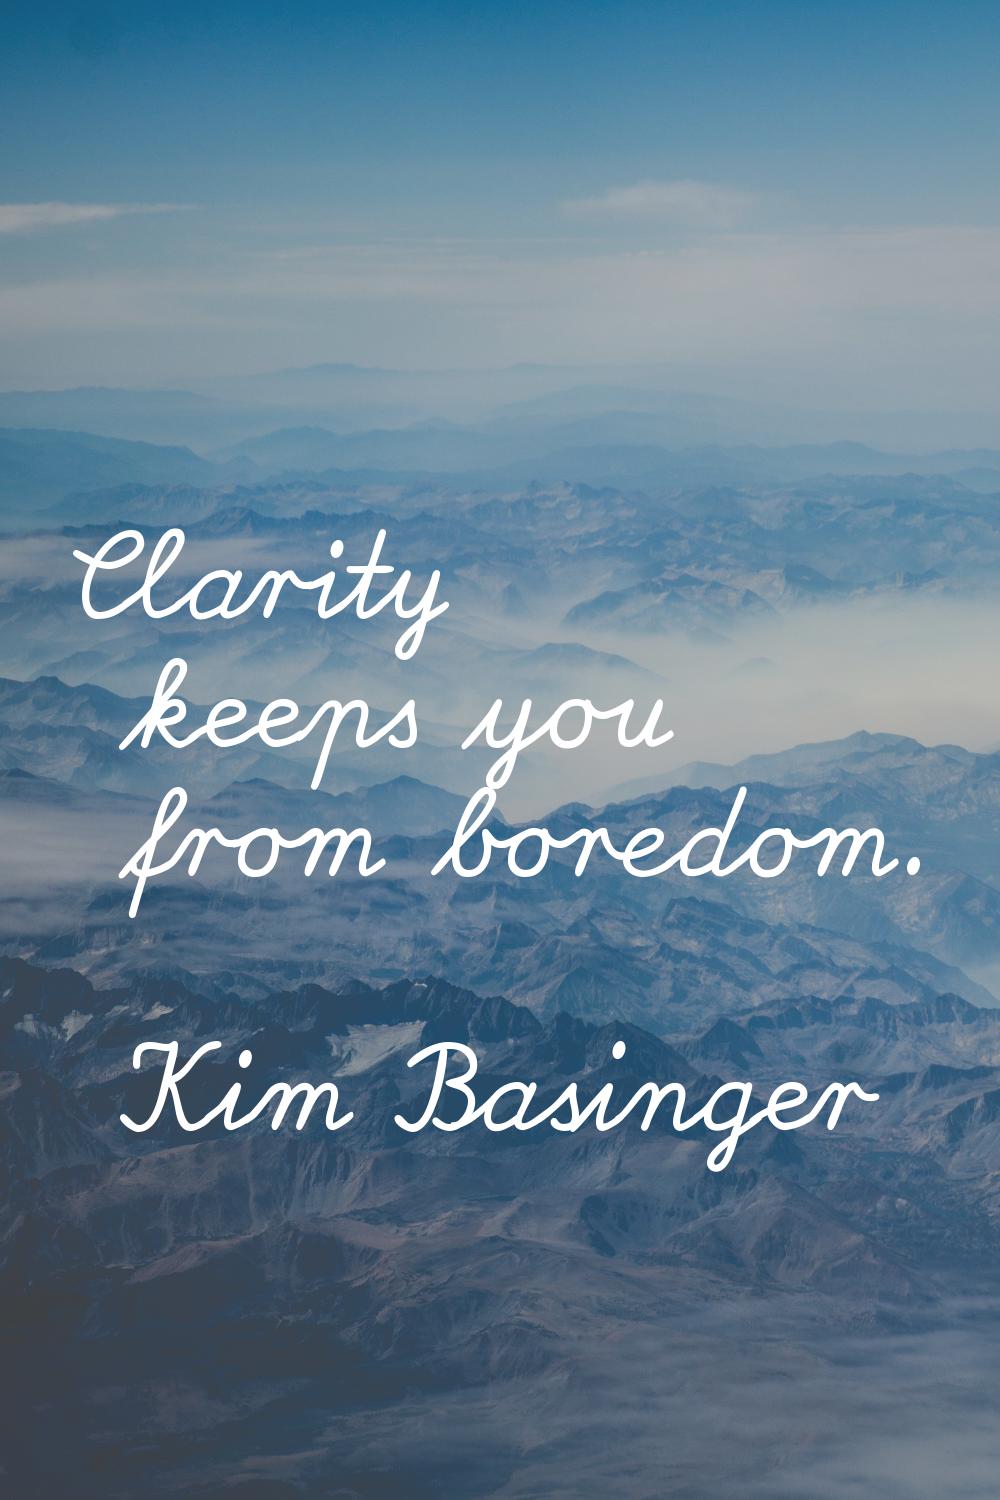 Clarity keeps you from boredom.